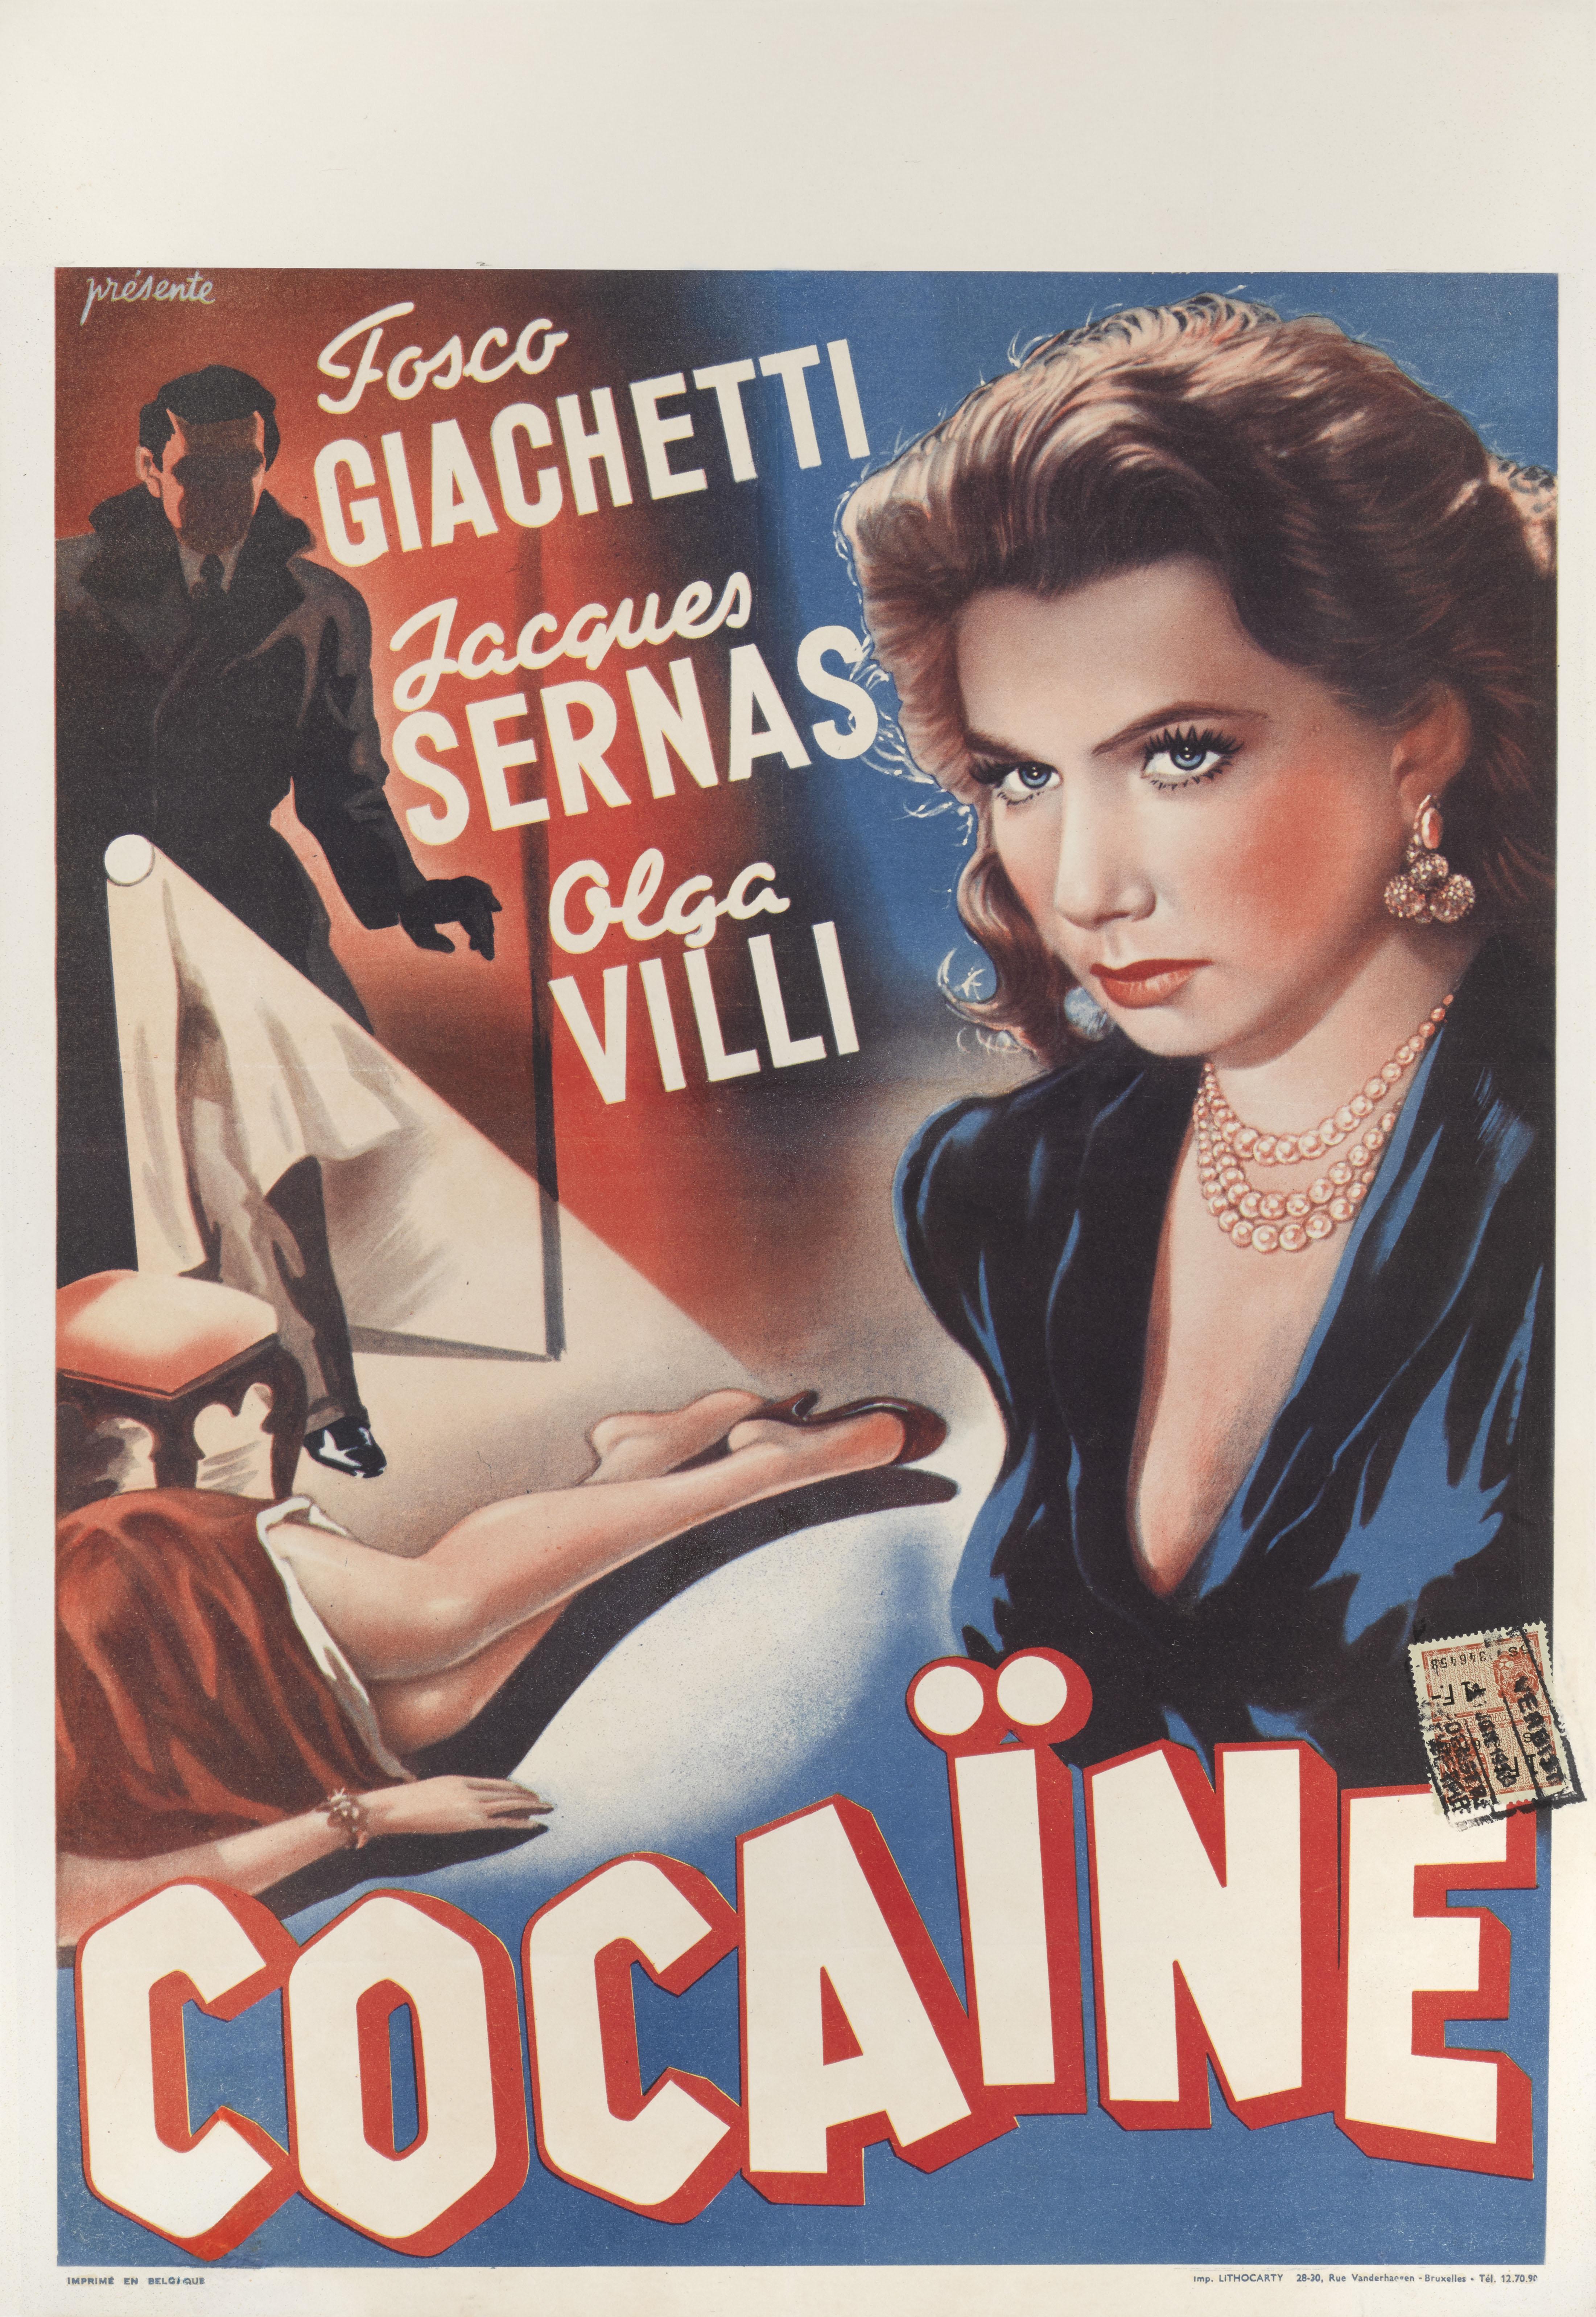 Original Belgian film poster for the 1948 Italian drama film about a cocaine trafficker.
This film was released in Belgium with the title changed to Cocaine.
The film was directed by Giorgio Bianchi and starred Fosco Giachetti, Jacques Sernas and